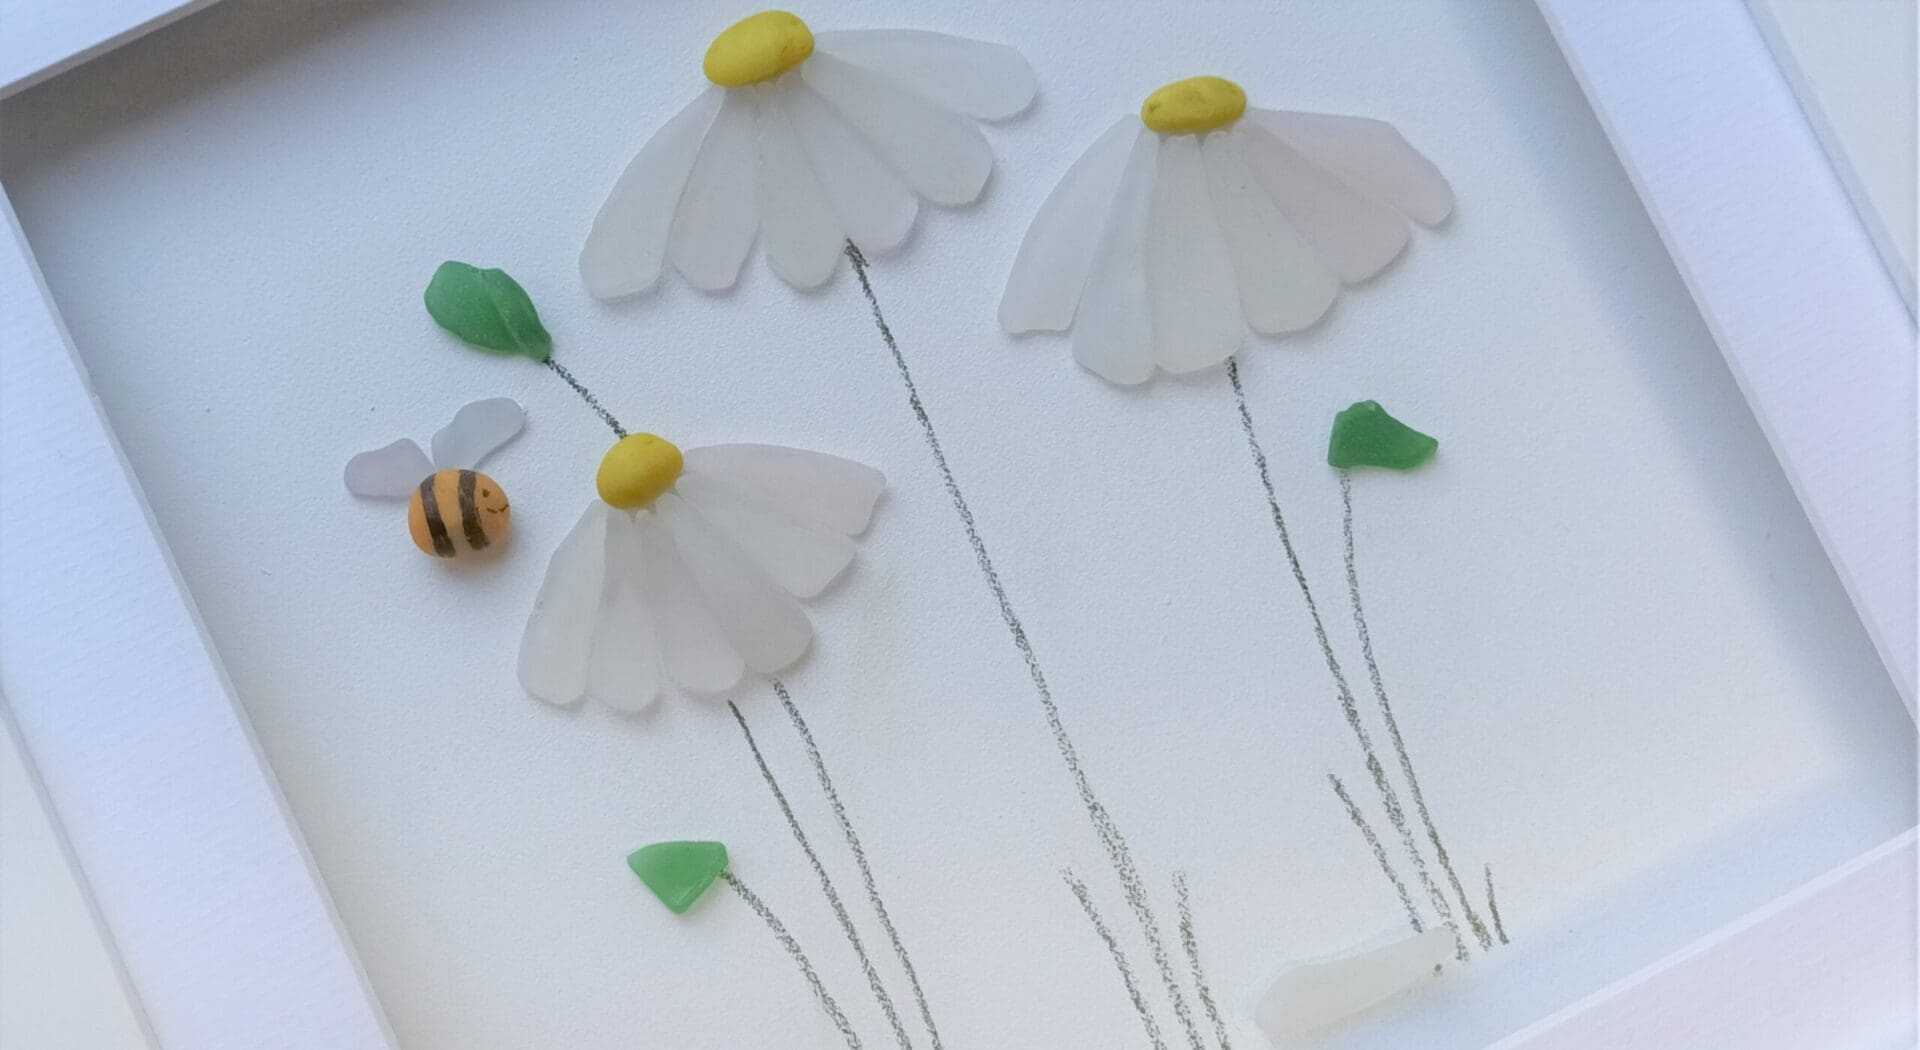 sea glass daisies and bee in 29cm square frame